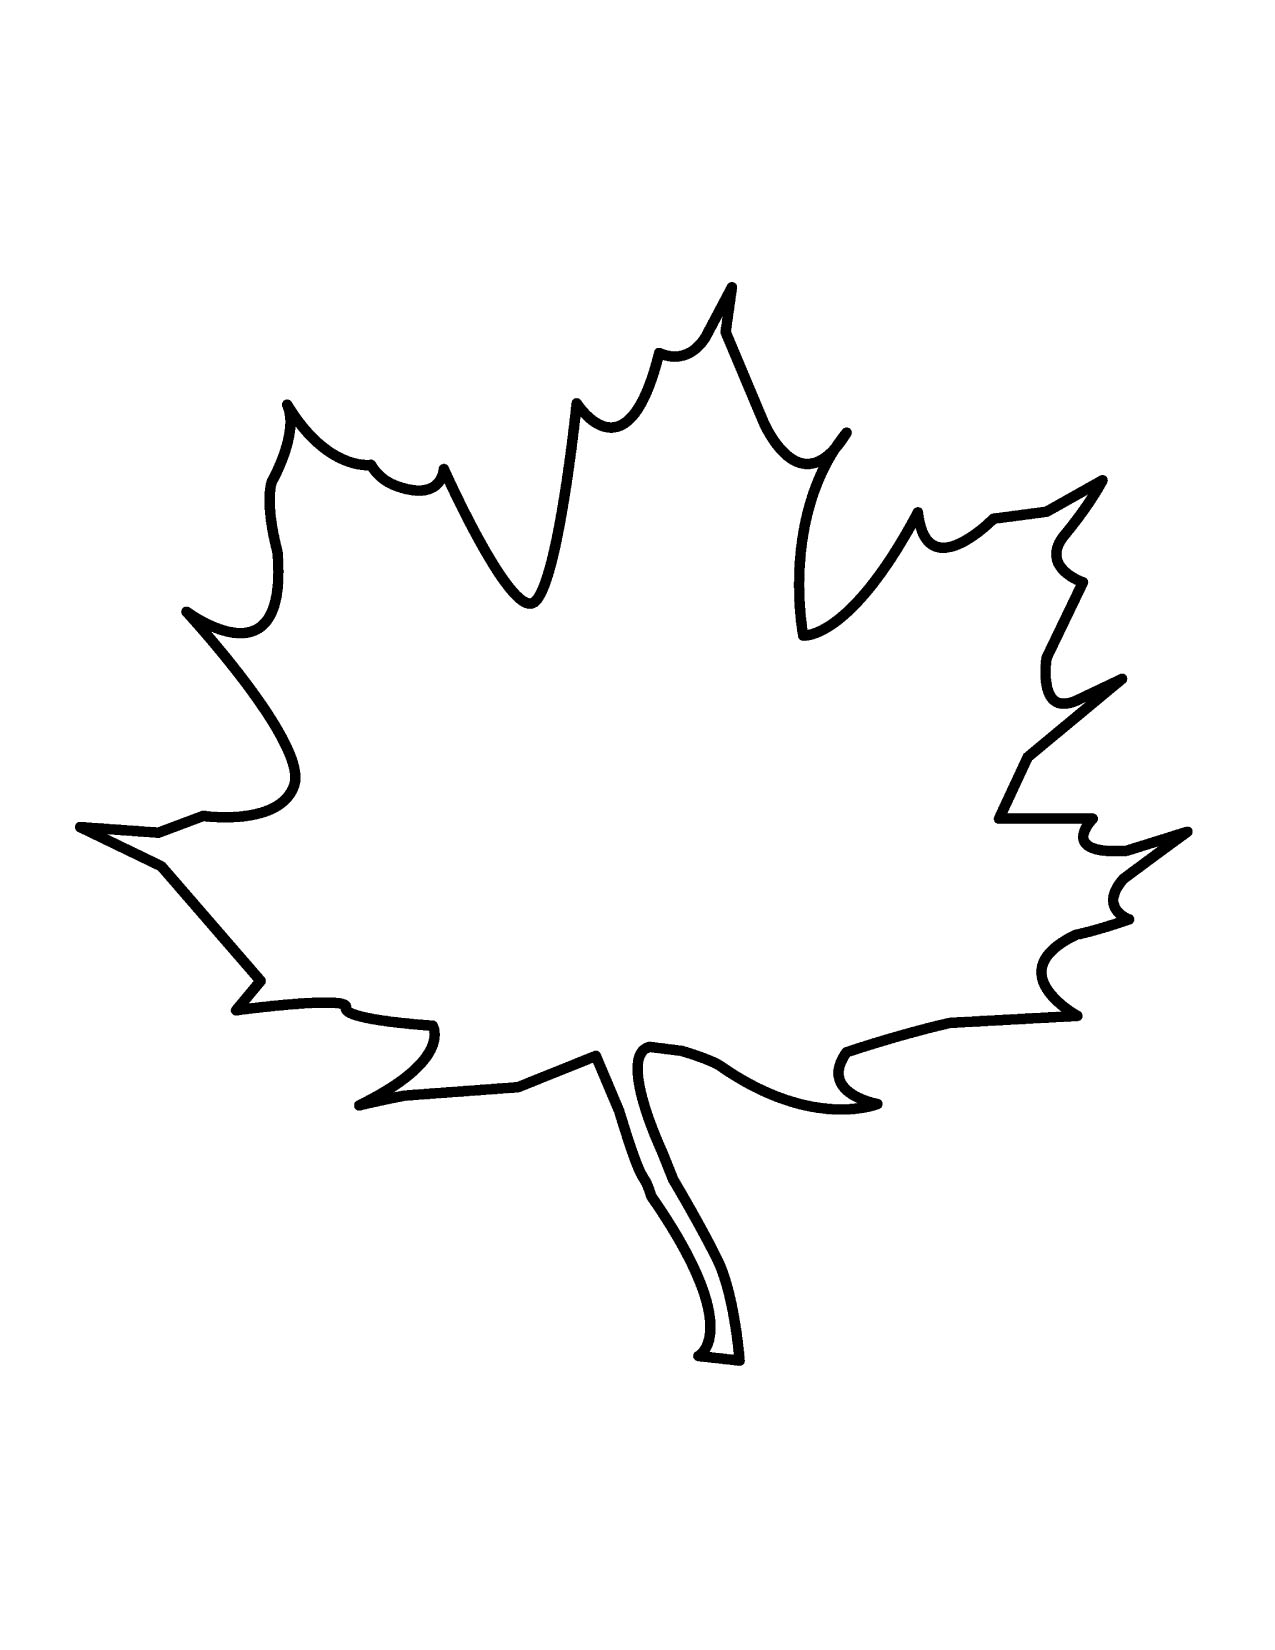 18 Fall Leaves Outline Free Cliparts That You Can Download To You